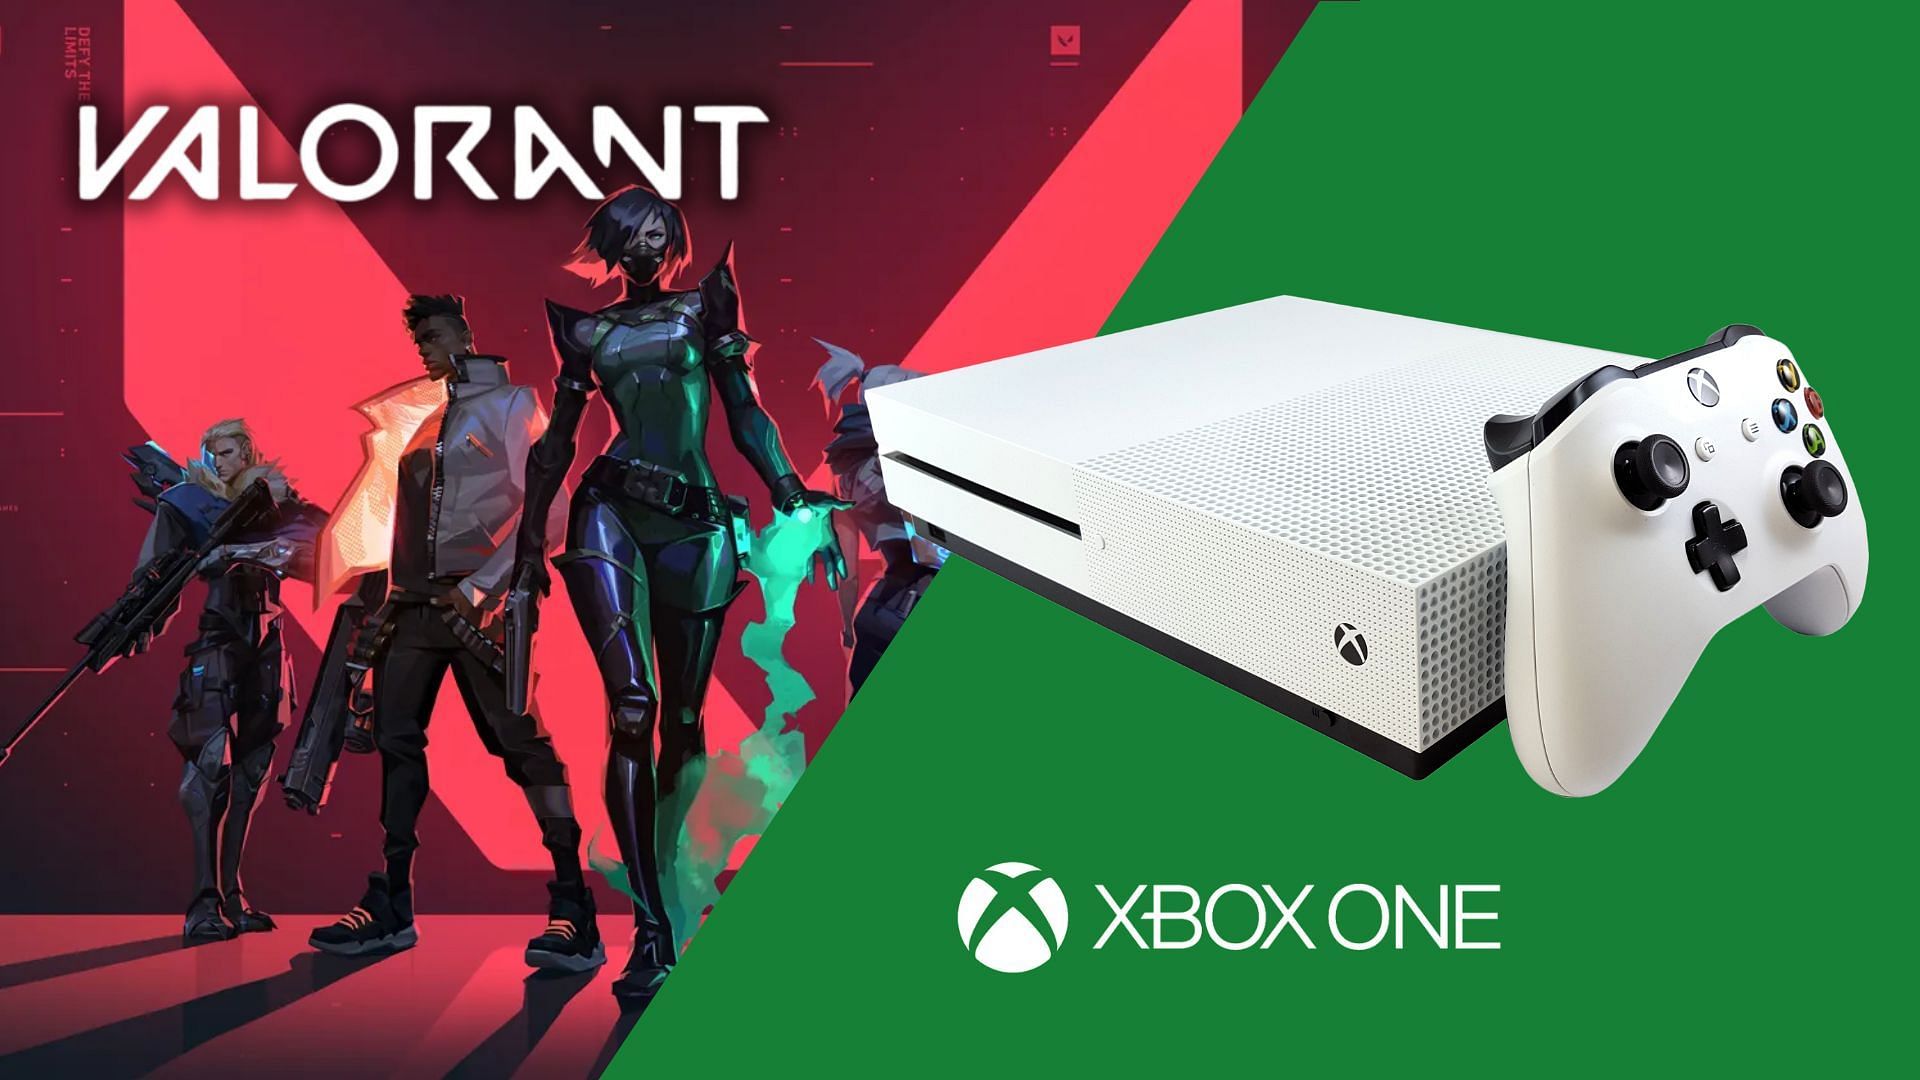 Can you play Valorant on Xbox One?